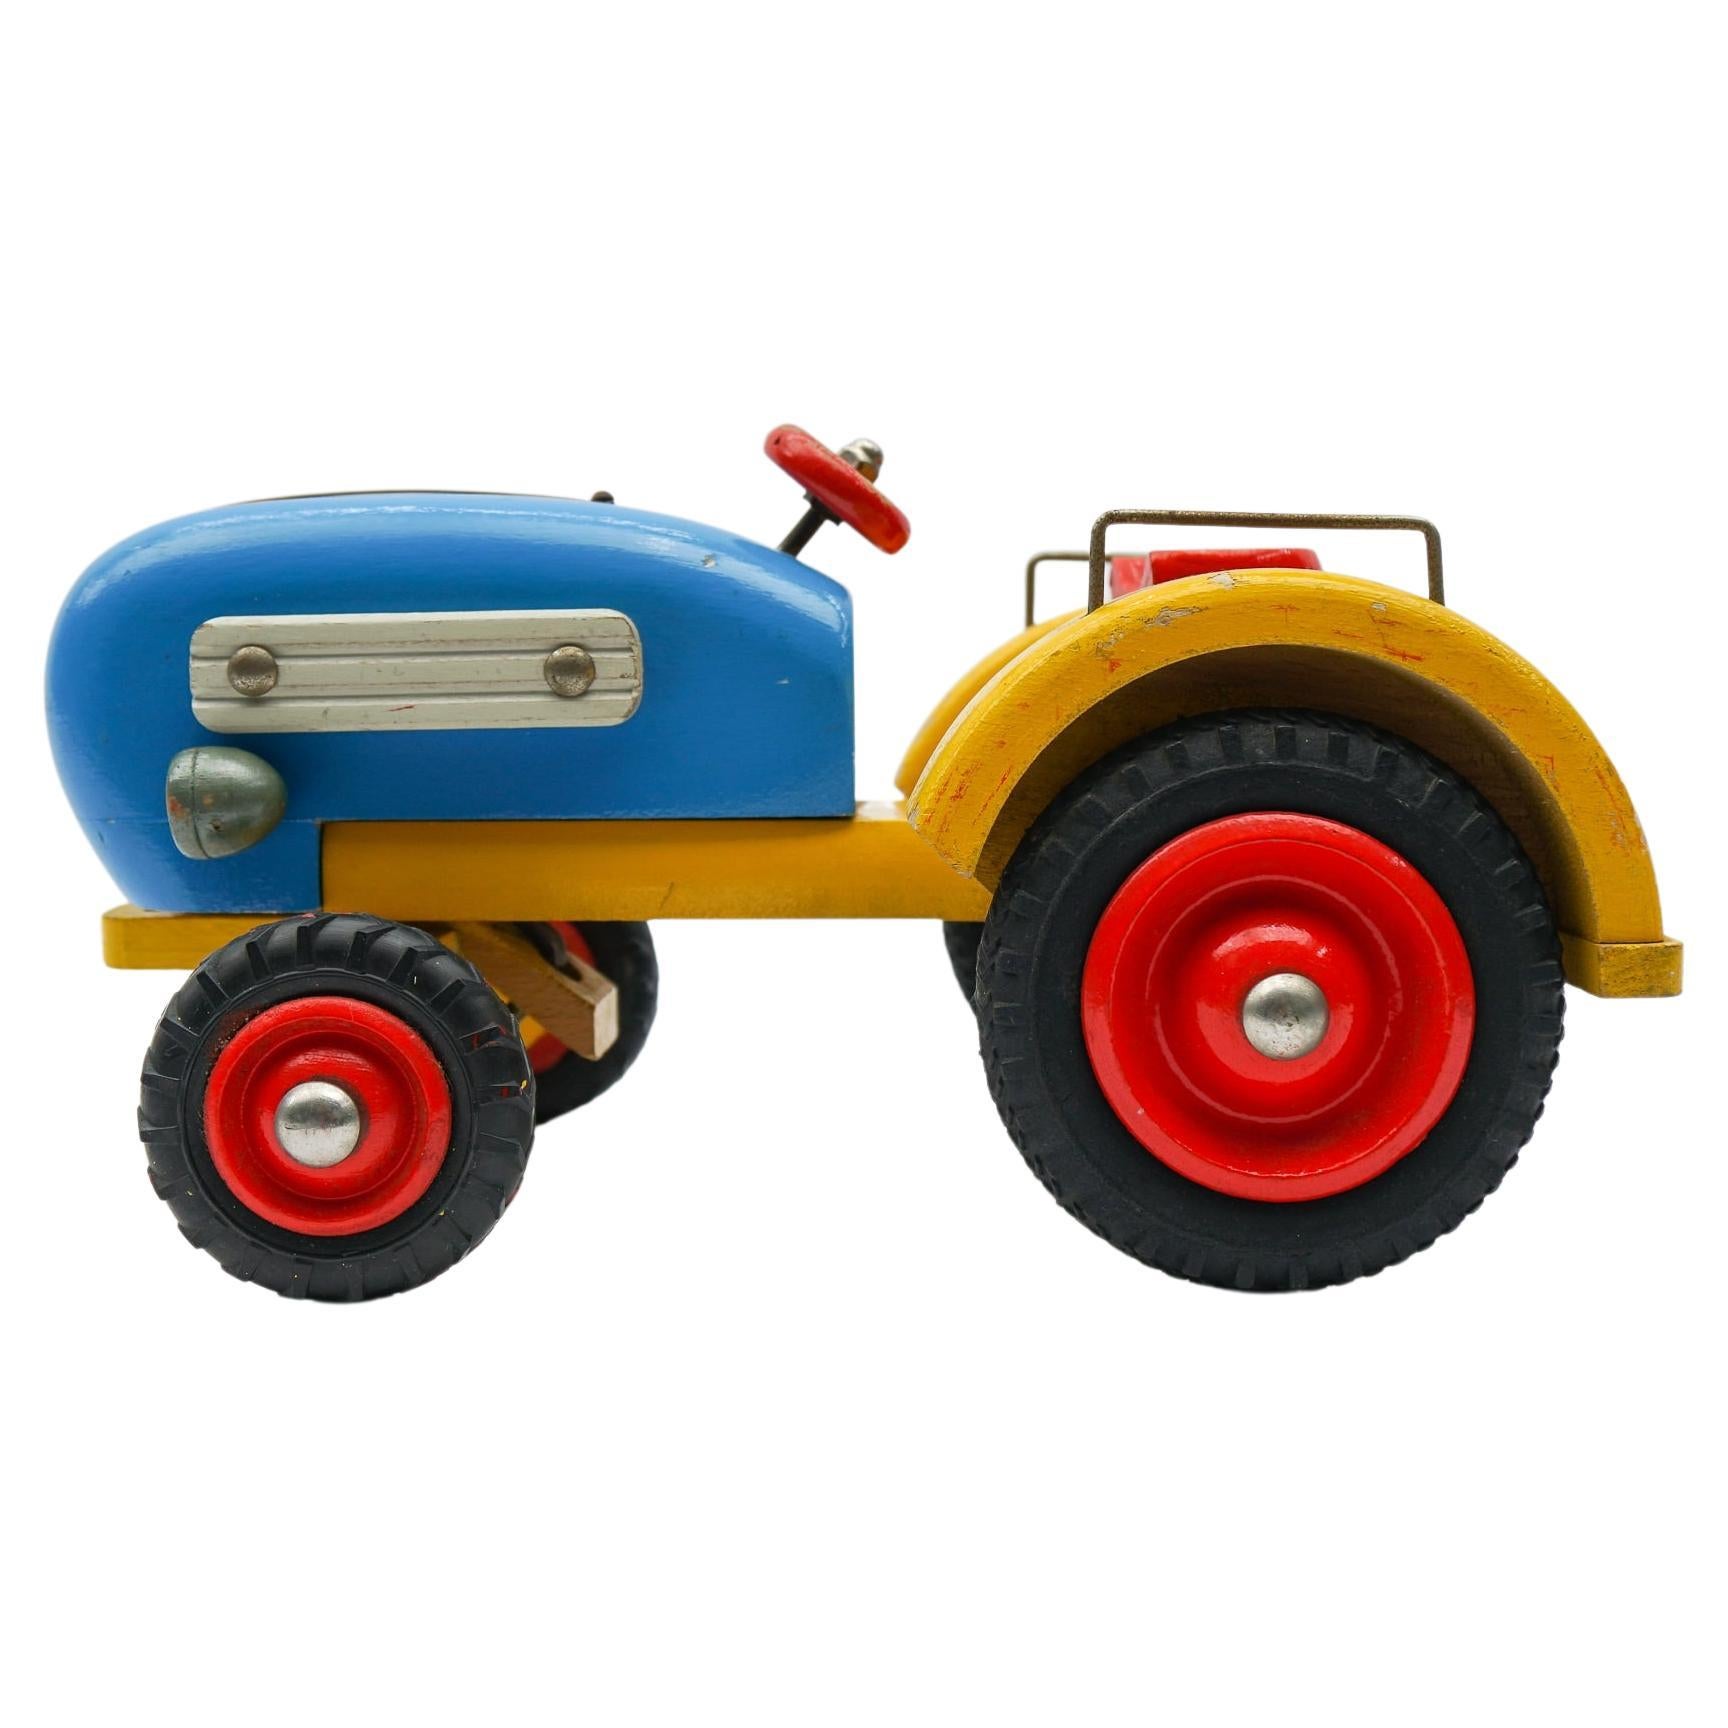 Colorful Waldorf School Tractor with Movable Front Axle, 1950s Germany For Sale